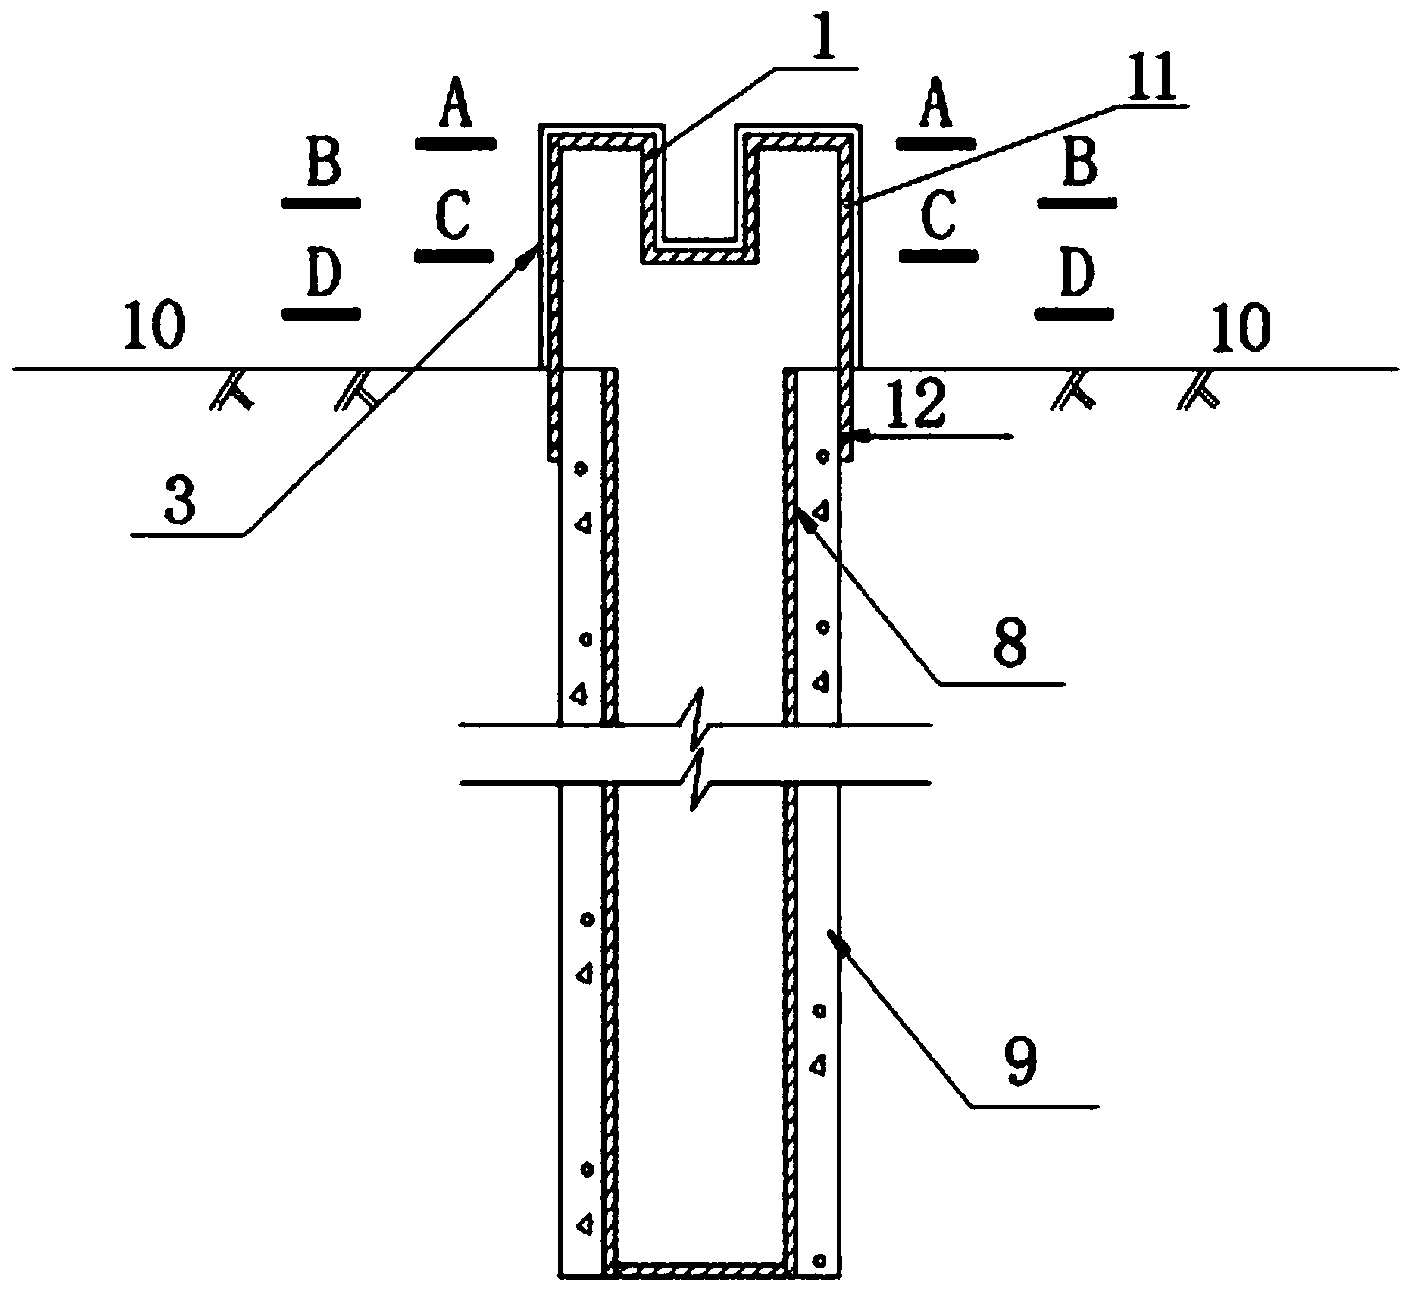 Semicircular dual-type self-infiltrating reverse-filtering recharge well mouth device